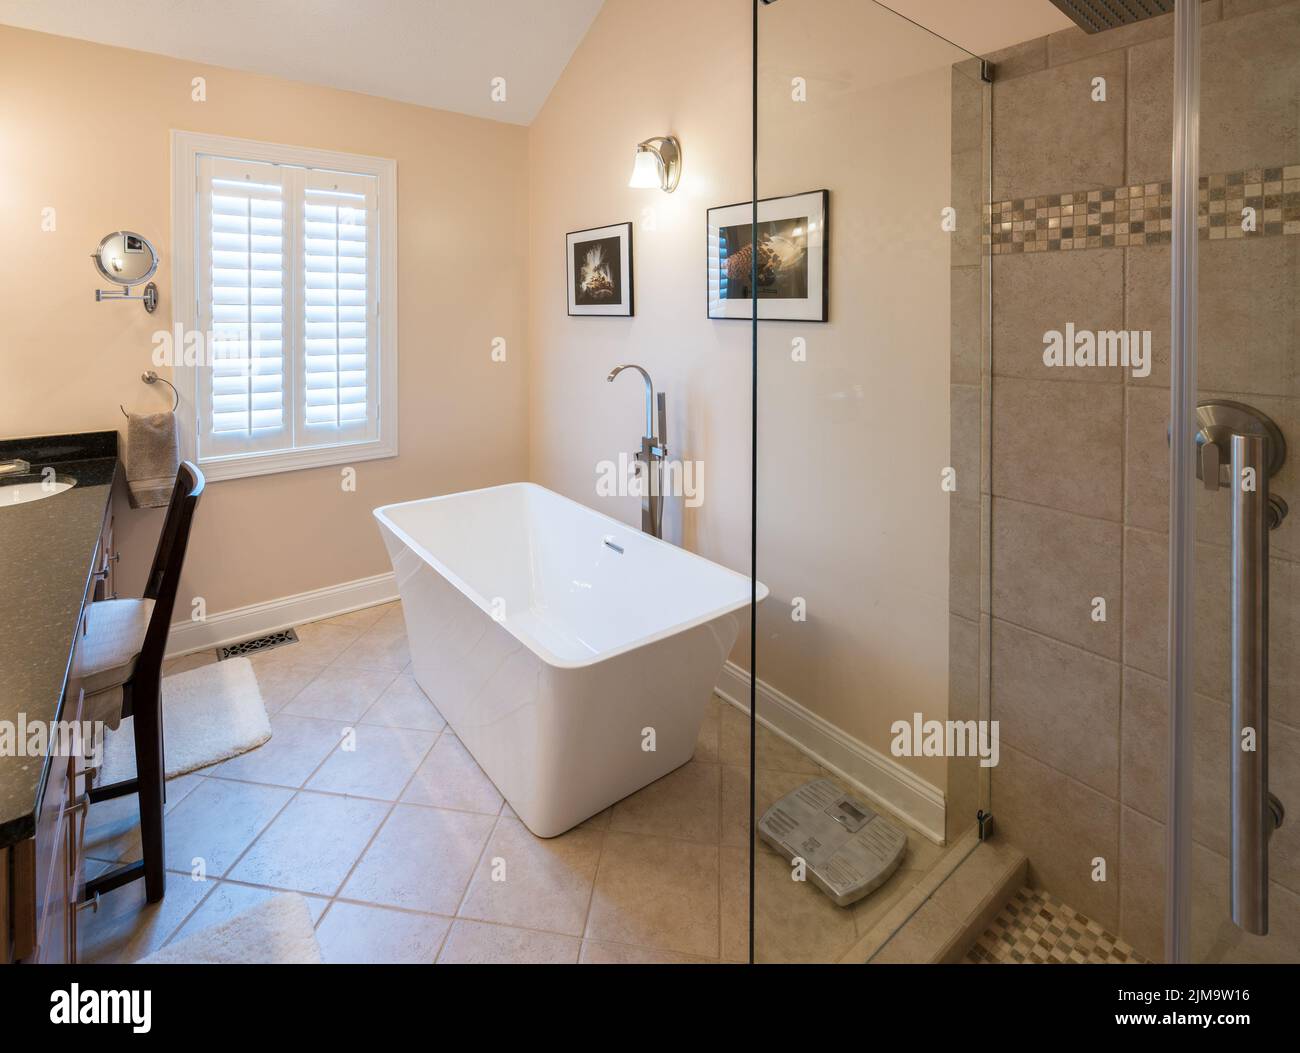 Modern bathroom with freestanding tub and shower Stock Photo